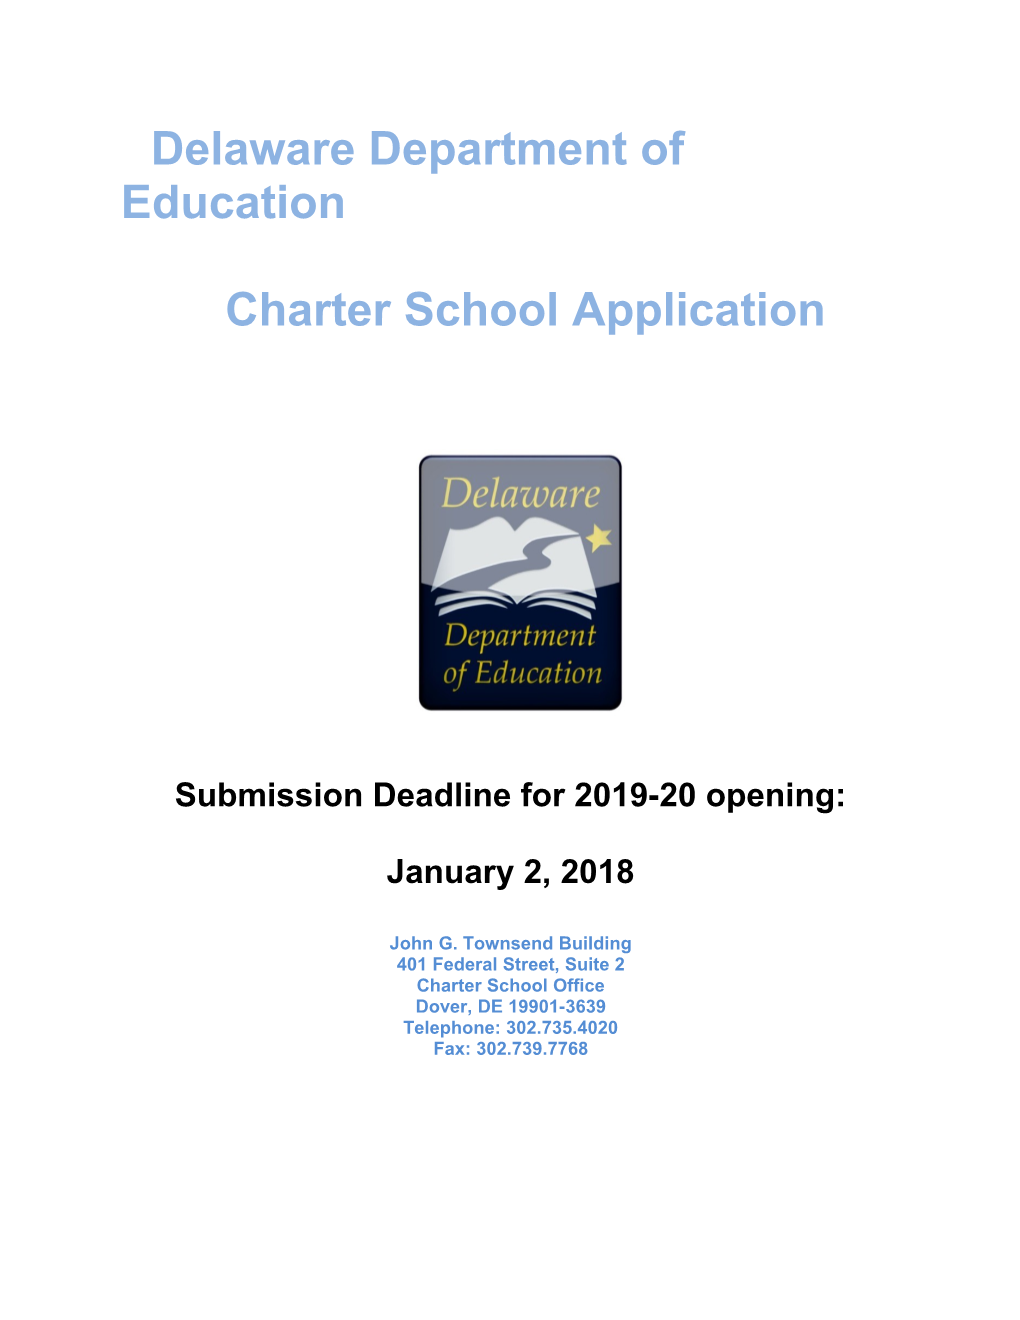 Submission Deadline for 2019-20 Opening